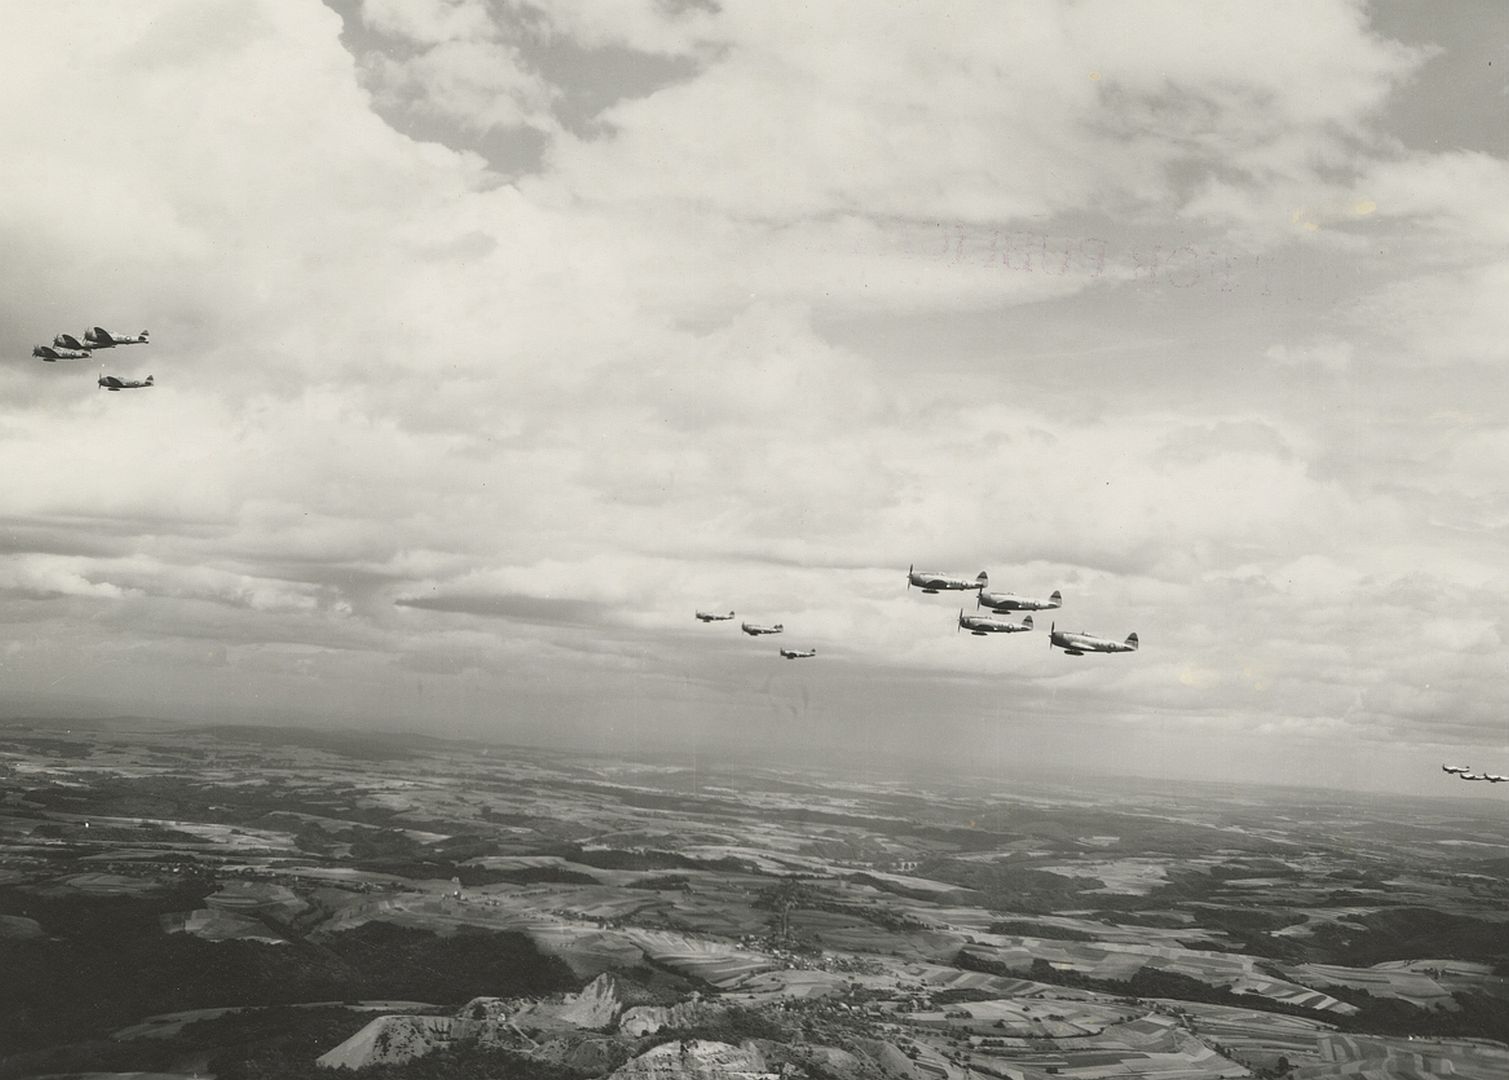 47 Thunderbolt Aircraft In Flight Over An Unidentified Location Circa 1945